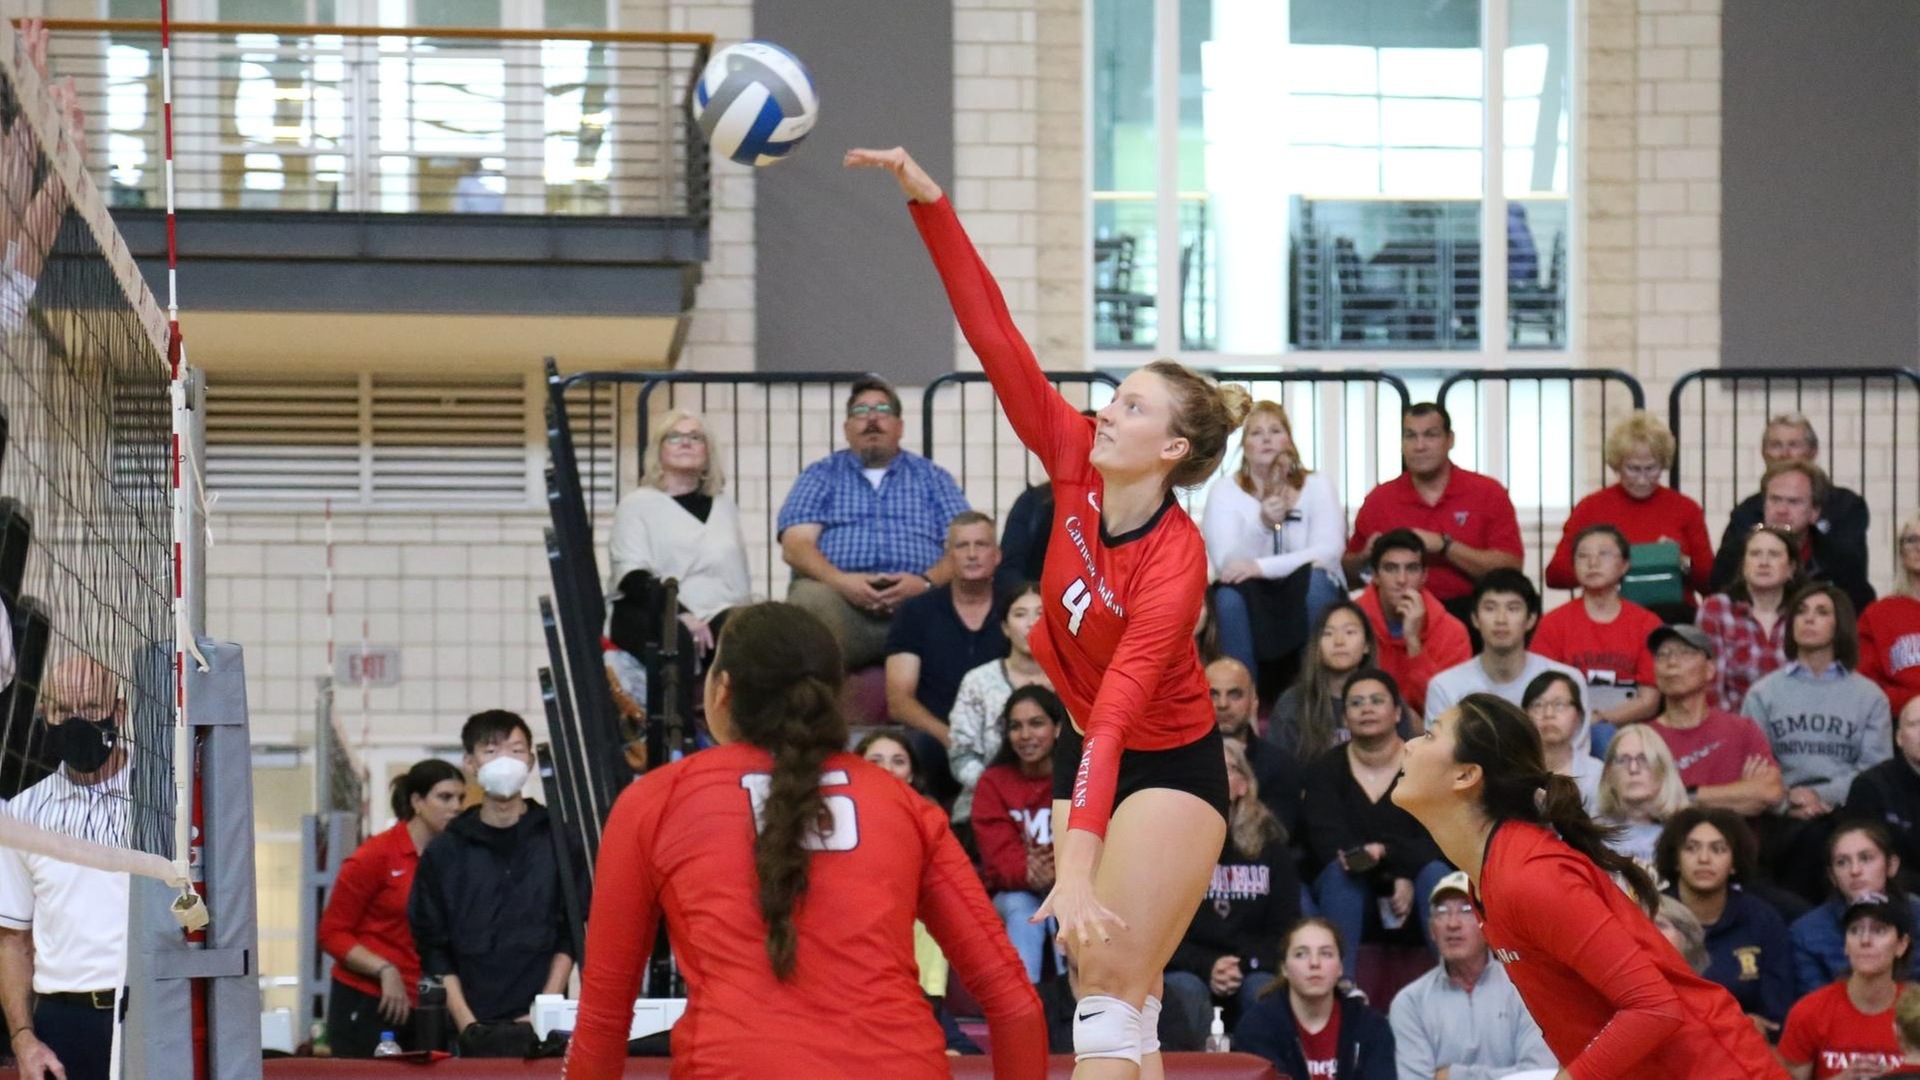 women's volleyball player jumping and swinging at a ball with her right arm